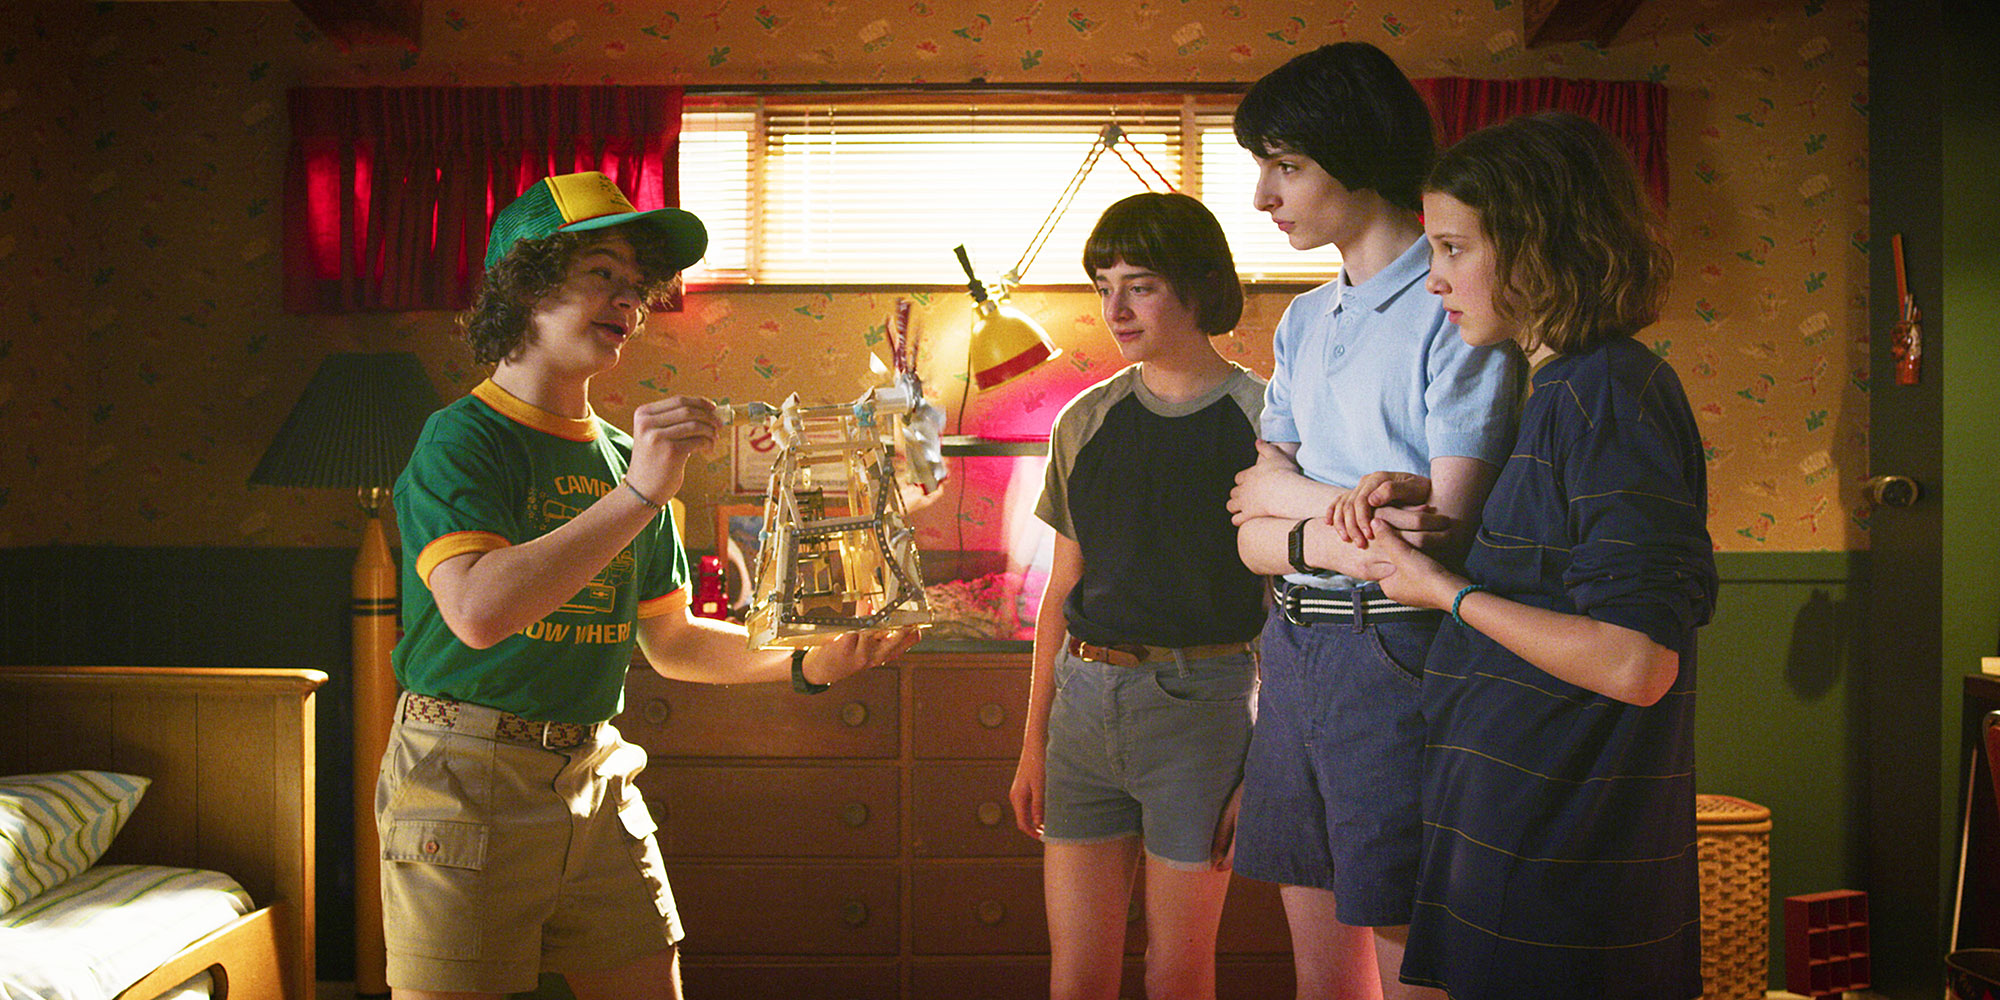 Stranger Things: The Show Still Can't Decide What To Do With Will